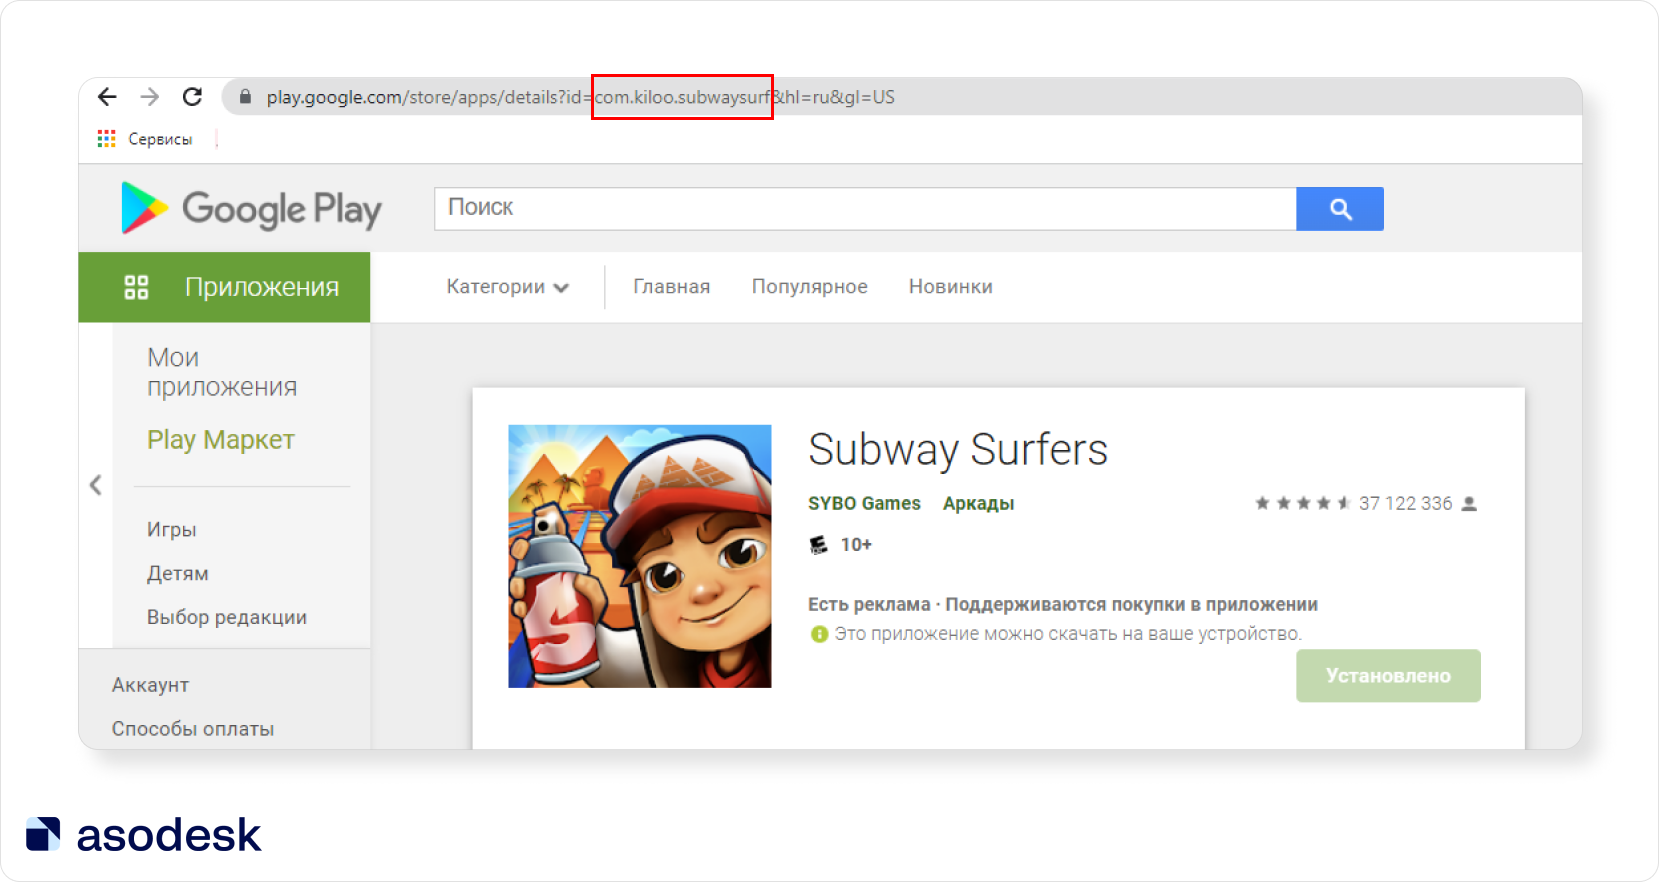 Package name in Google Play affects app ranking